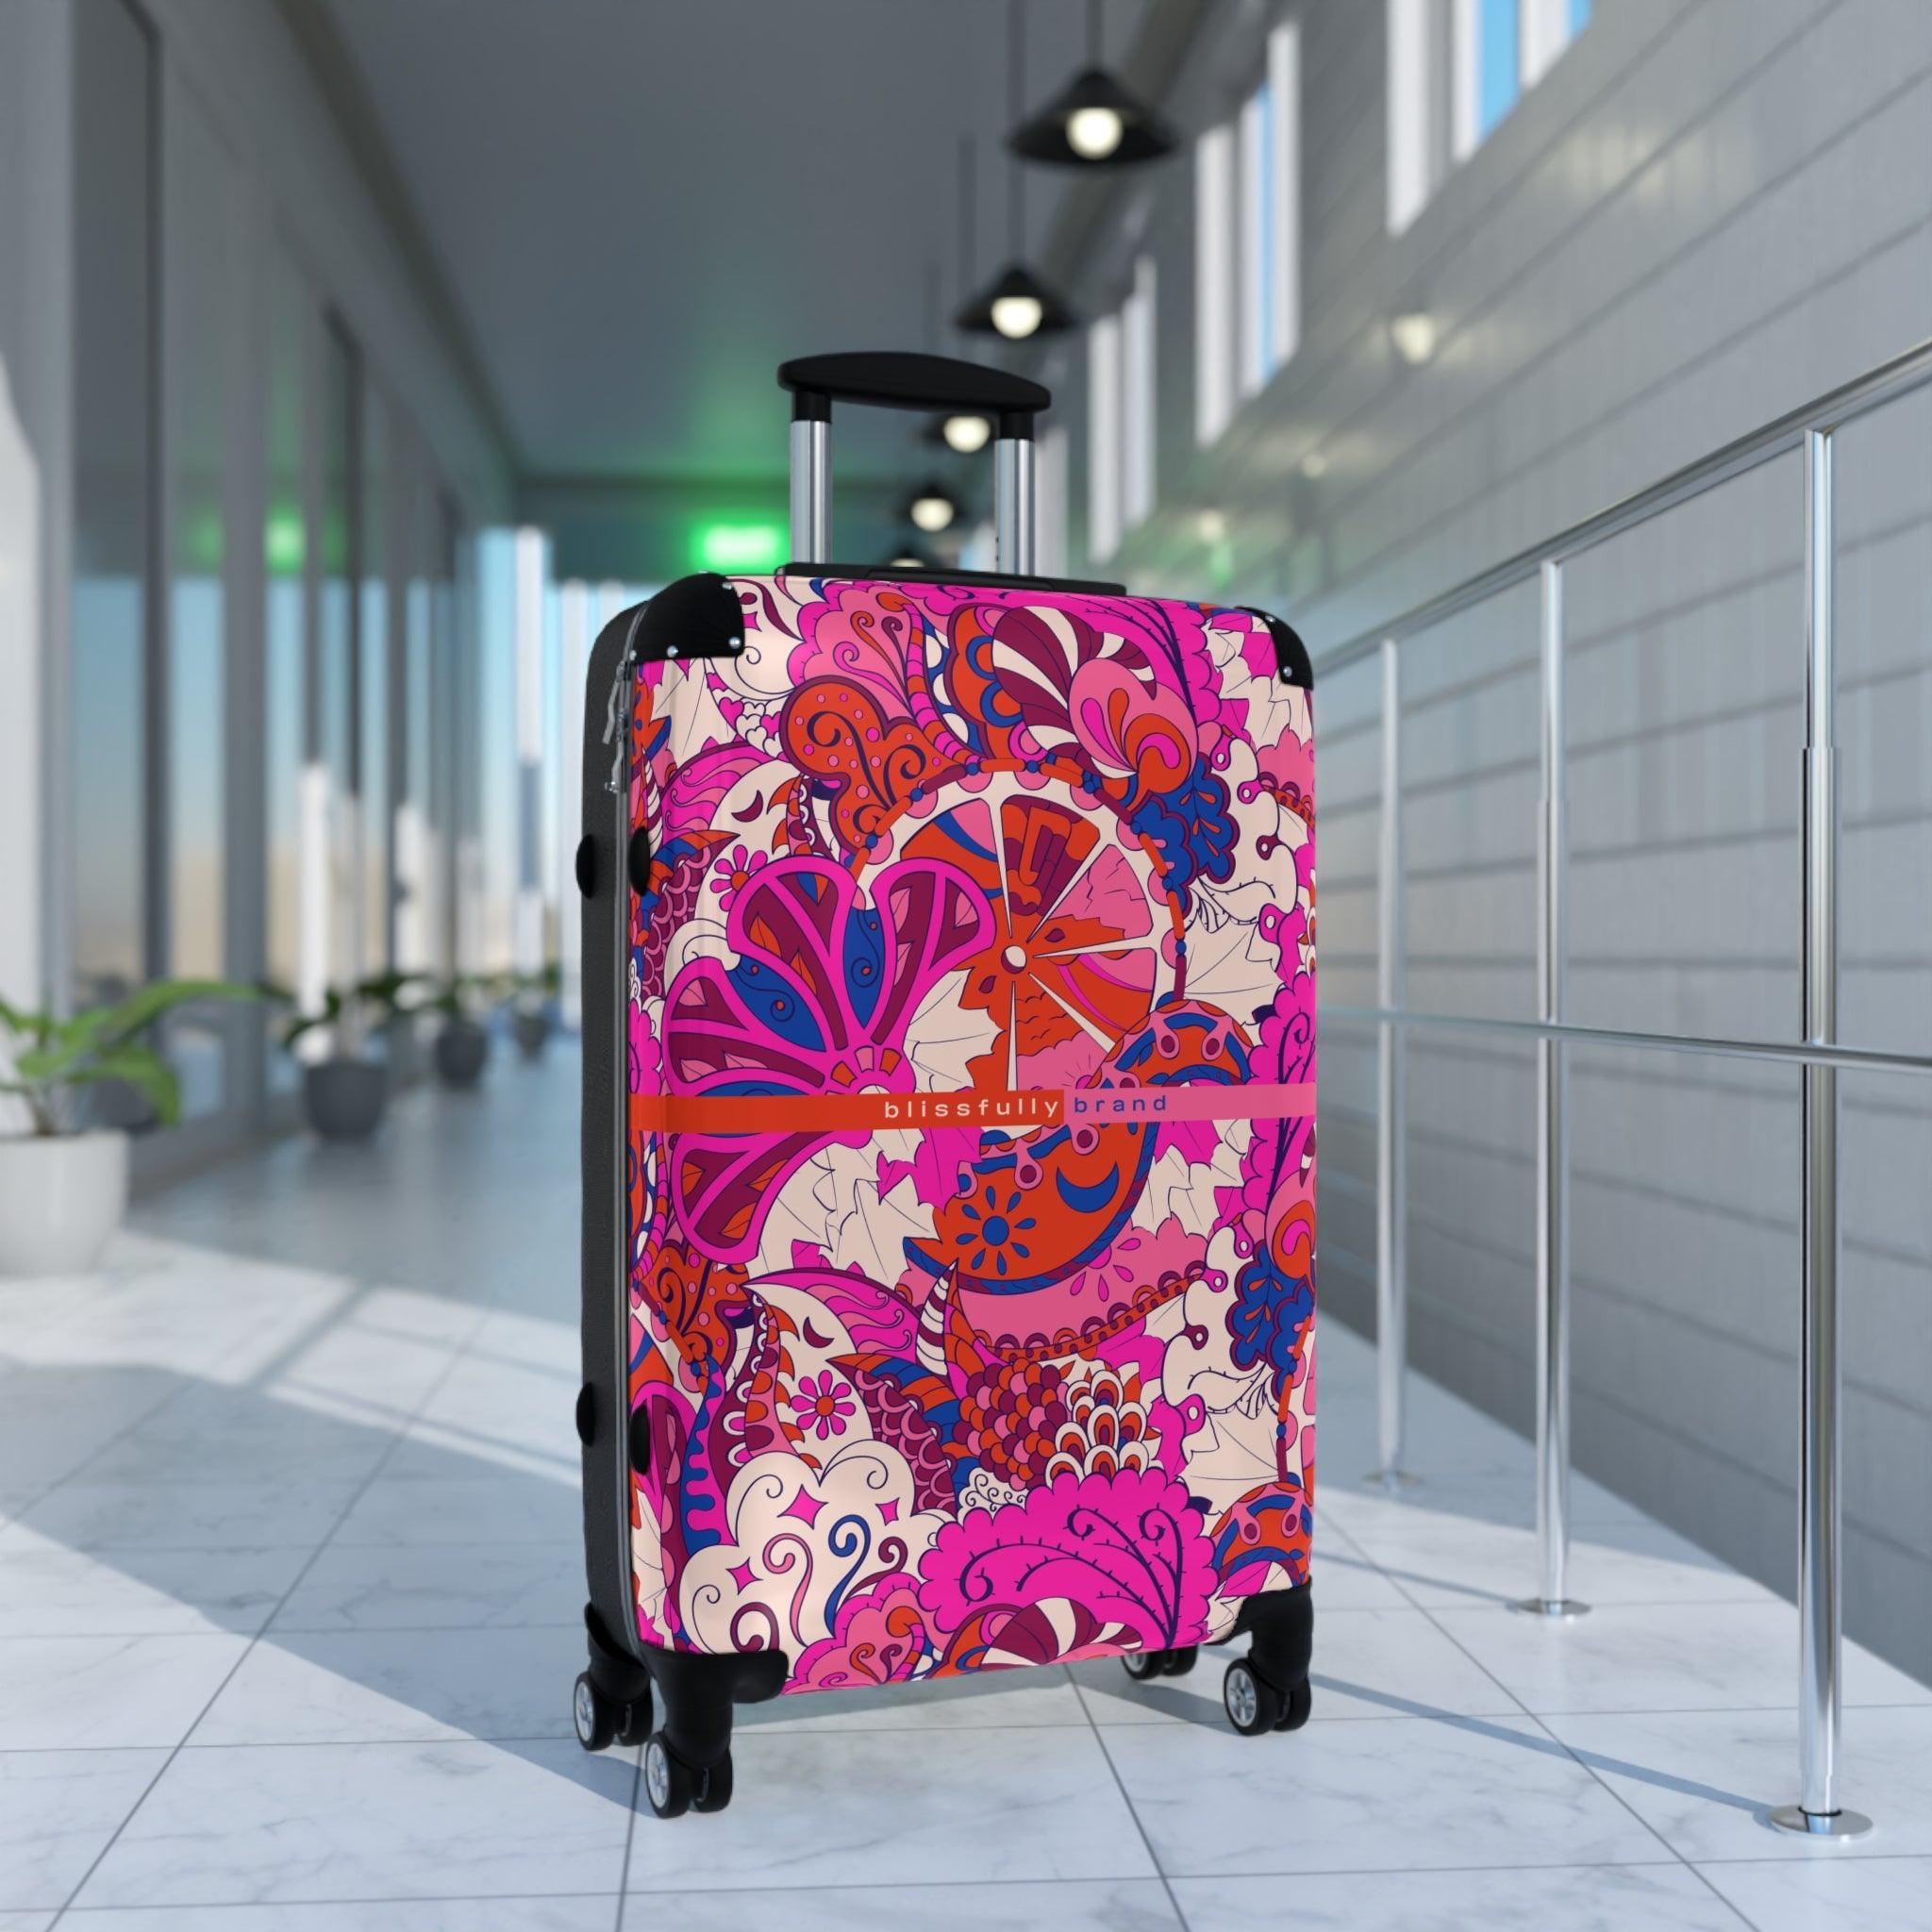 Sameria Luggage Collection - Abstract Kaleidoscope Paisley Floral Print Psychedelic Retro Swirls Funky Multicolor Check in Carry On Roller 360 Hard Shell Unique Retro Vibrant Bold Pink Red